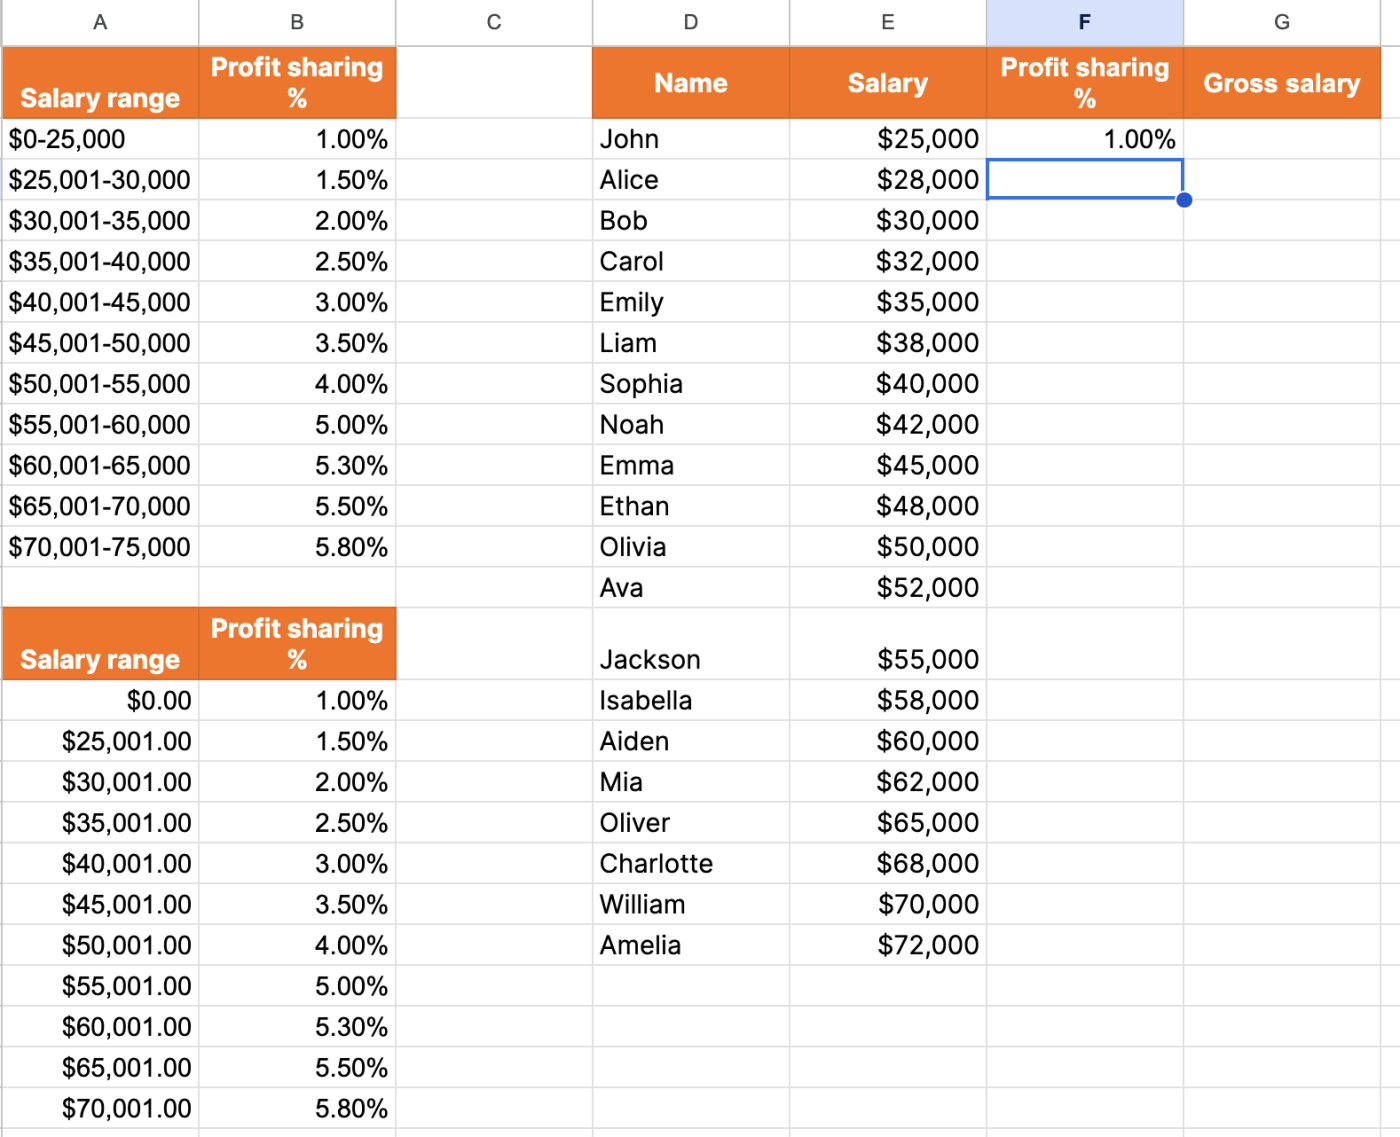 Screenshot of executing the function in a Google Sheet.